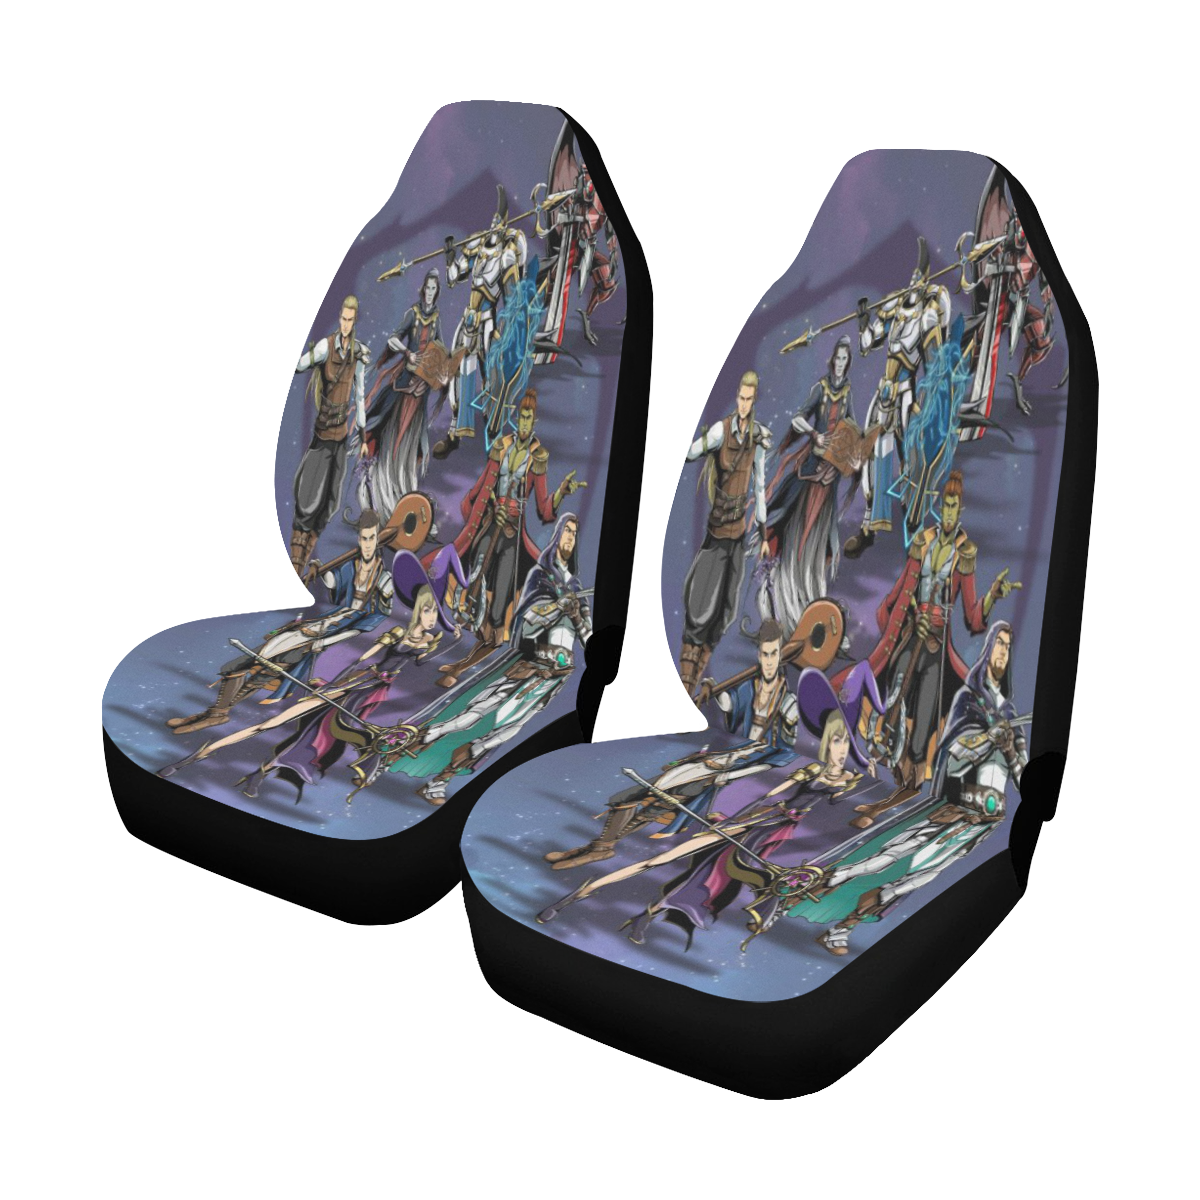 Dungeons and Dragons Seat Covers Original Art by Quillava22 on Fiverr and CHaracter Crush Clothing Car Seat Covers (Set of 2)